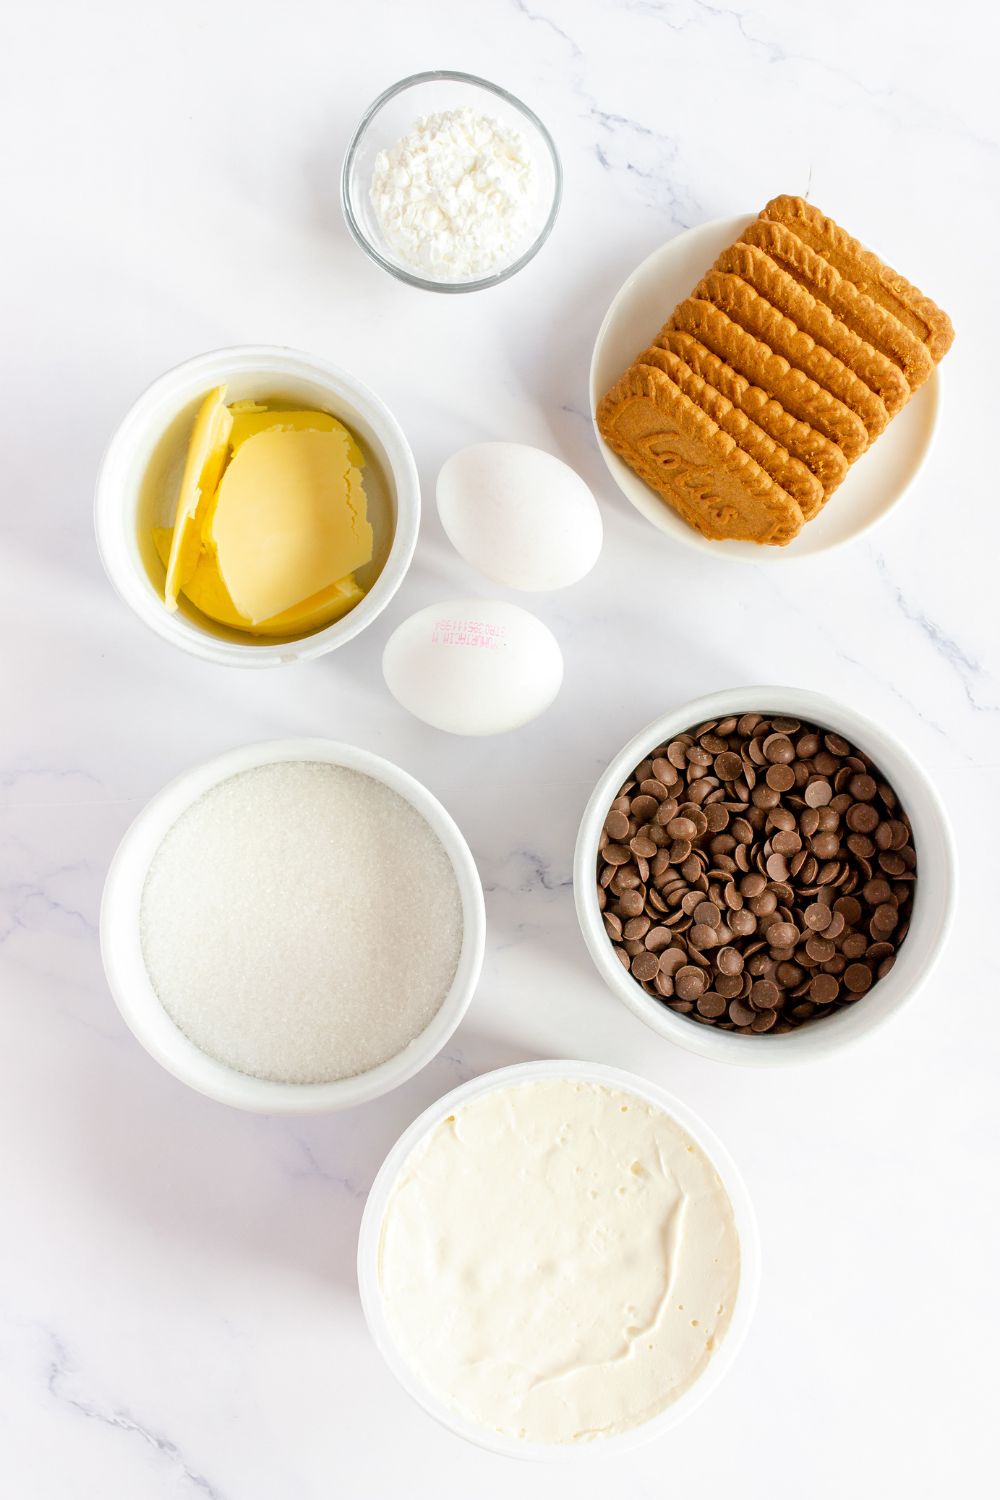 Ingredients for Easter Cheesecake recipe